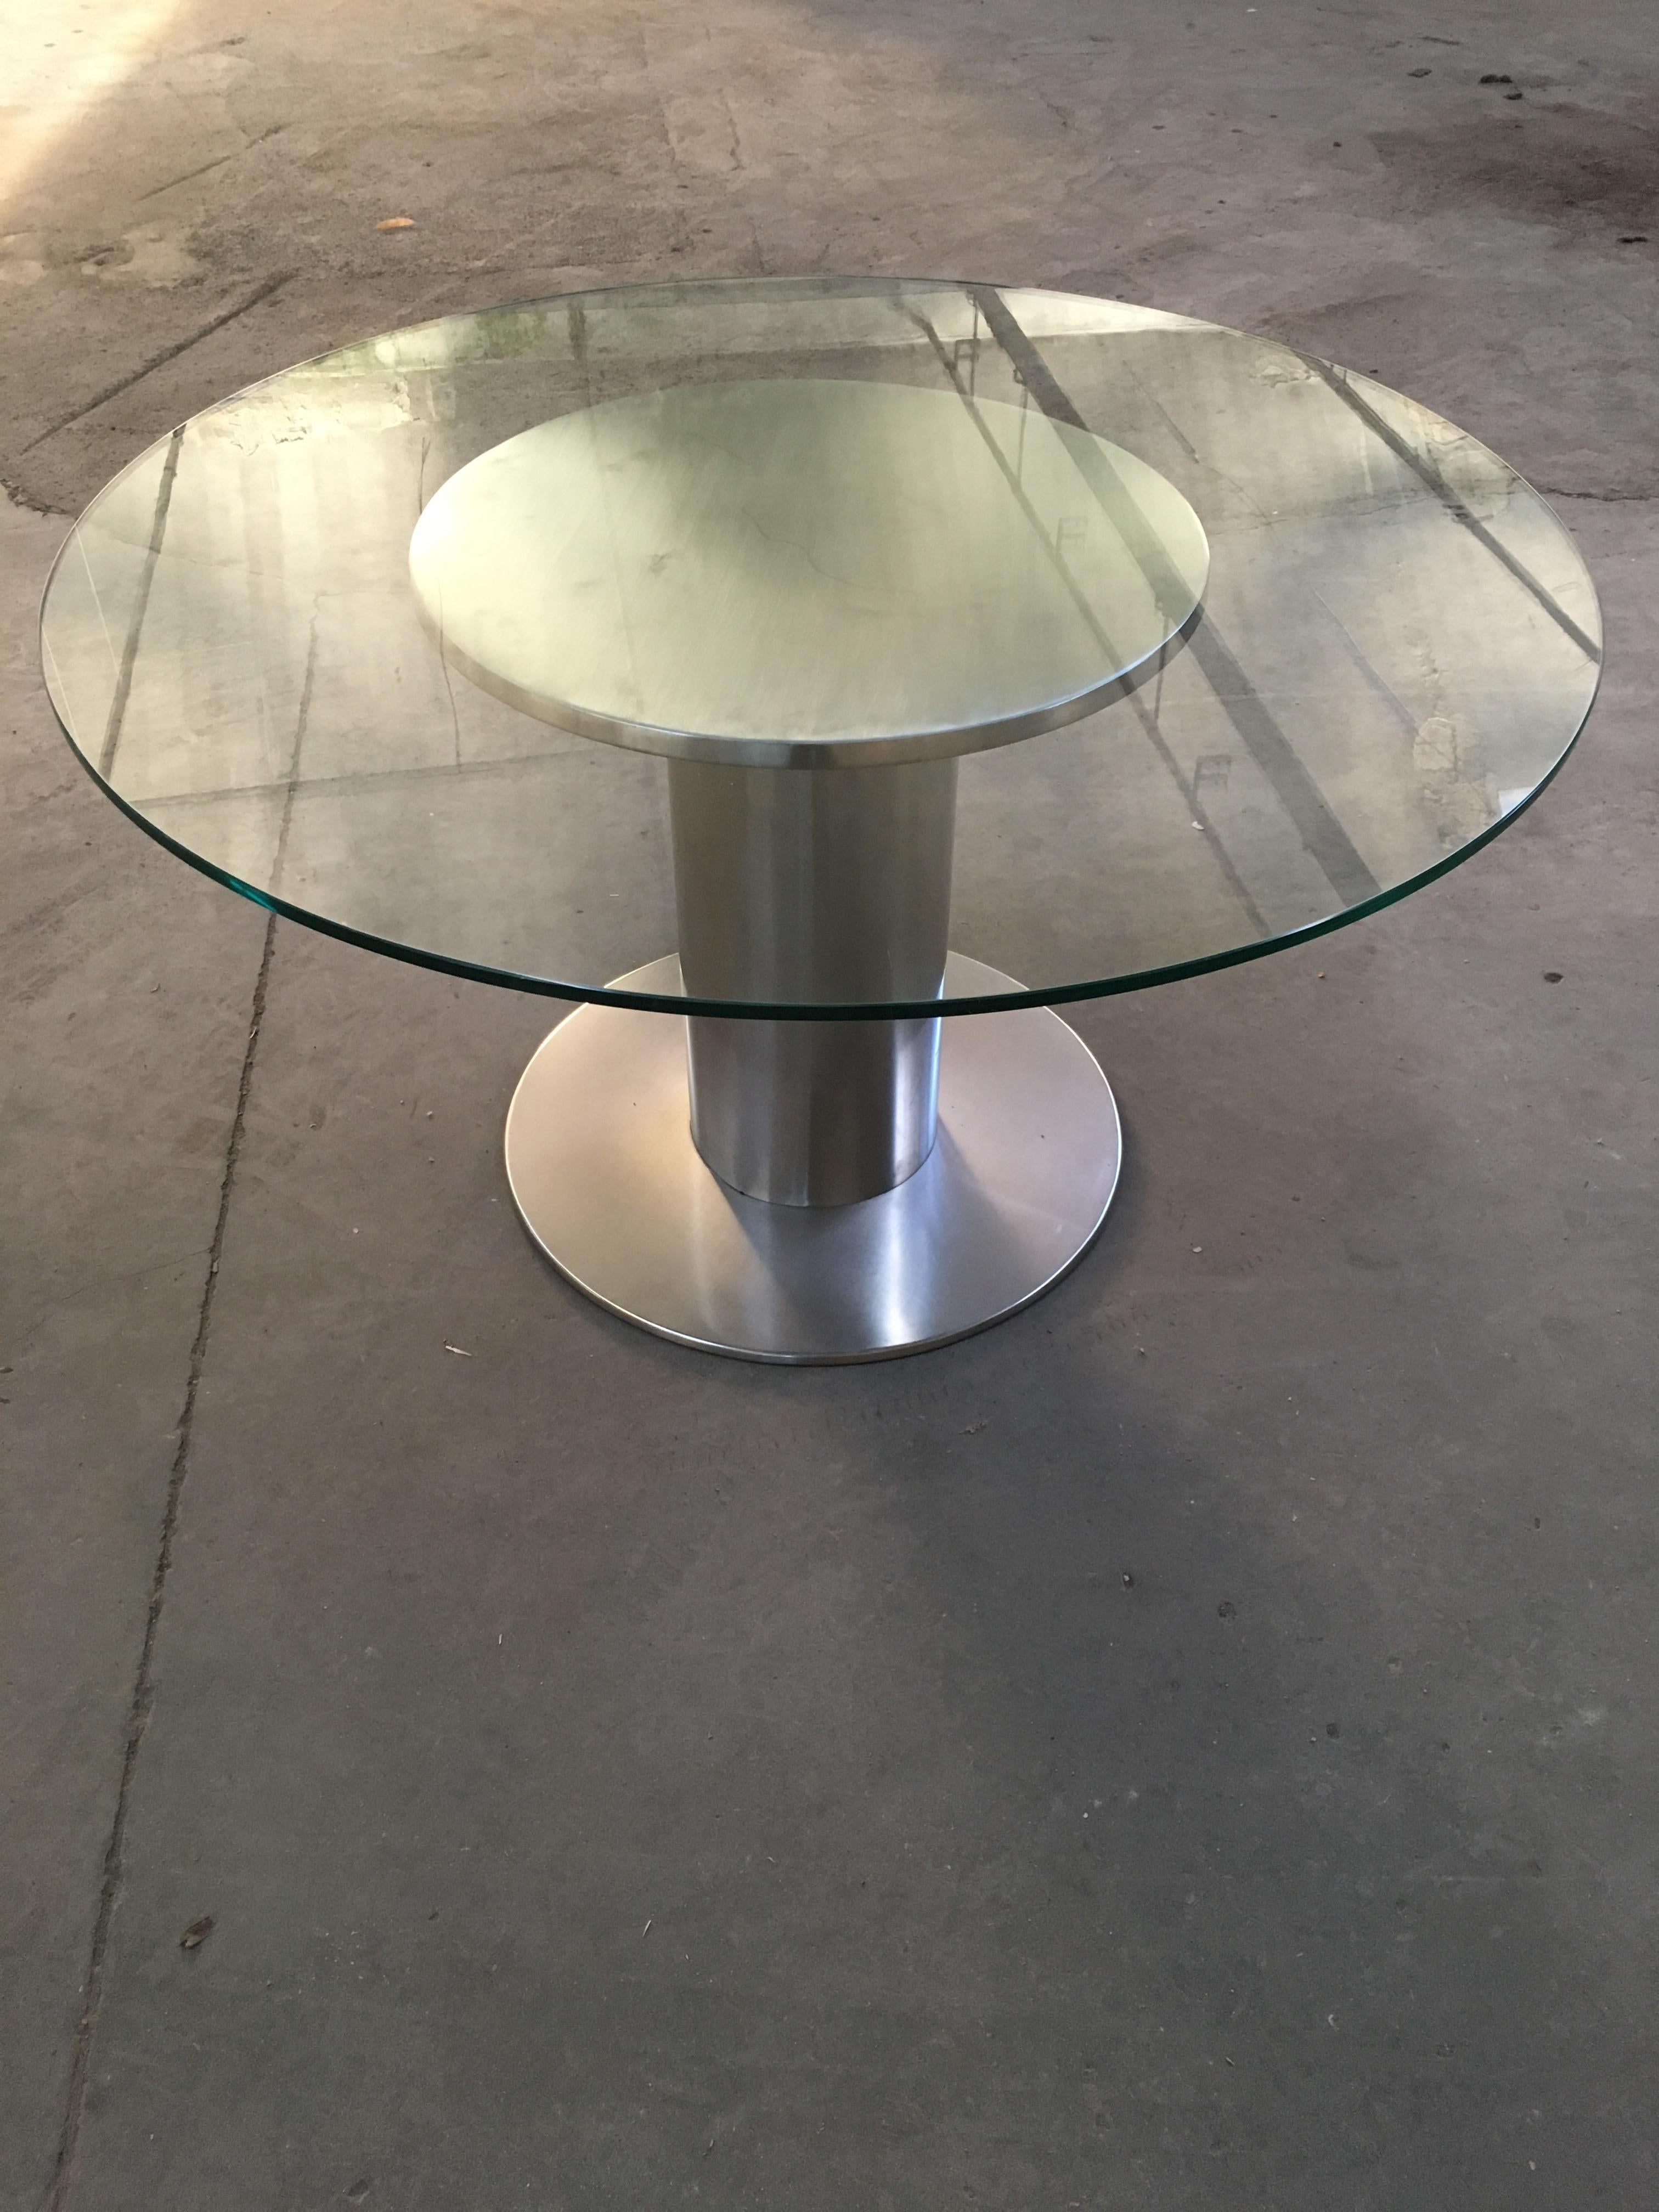 Mid-Century Modern Italian chrome stainless steel dining or side table with round glass top.